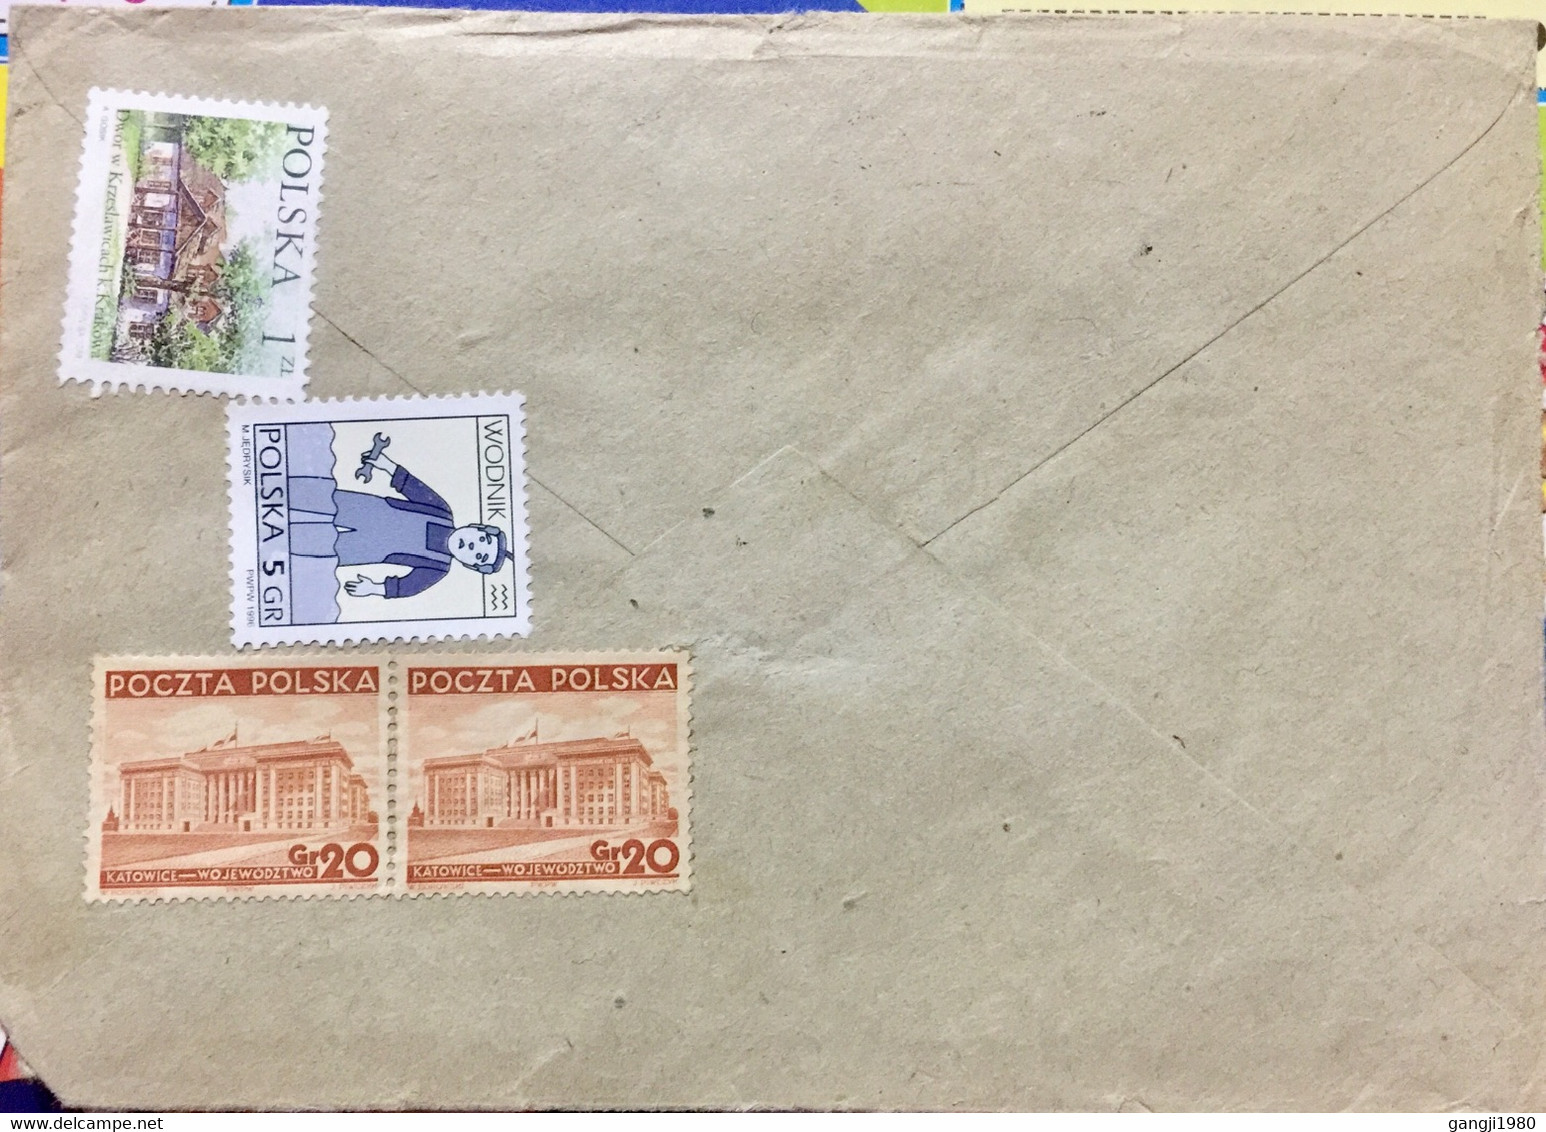 POLAND 2000, USED AIRMAIL COVER TO INDIA 4 DIFFERENT 1958 PICTURAL SPECIAL CANCELLATION, KATOWIDE ,HOUSE MUSIC,BUILDIN, - Cartas & Documentos